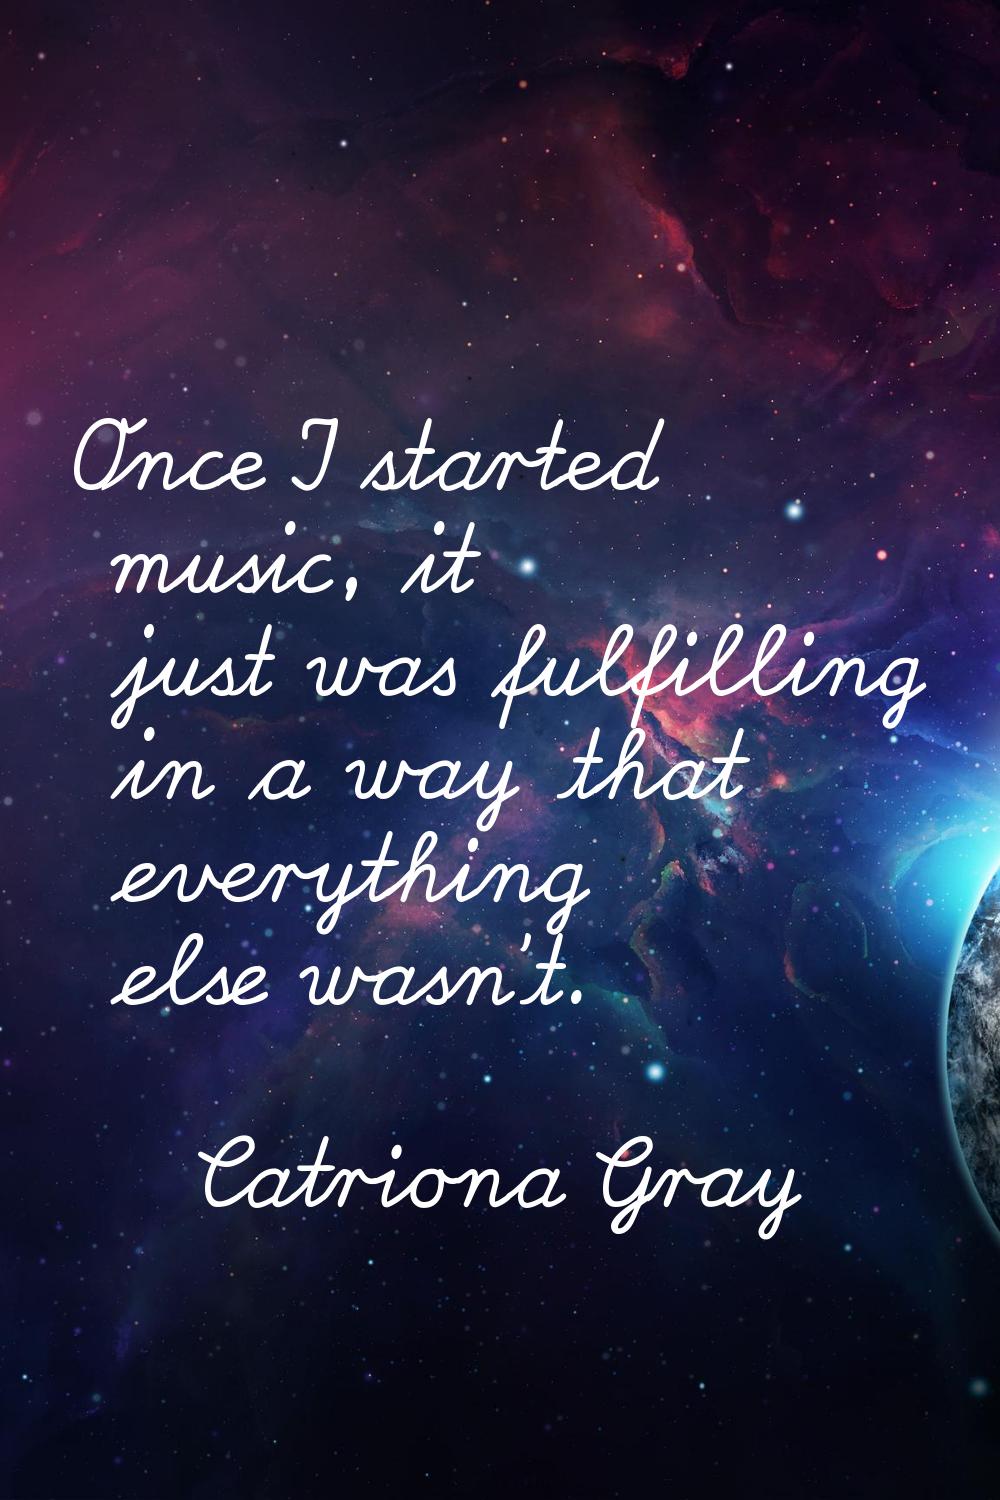 Once I started music, it just was fulfilling in a way that everything else wasn't.